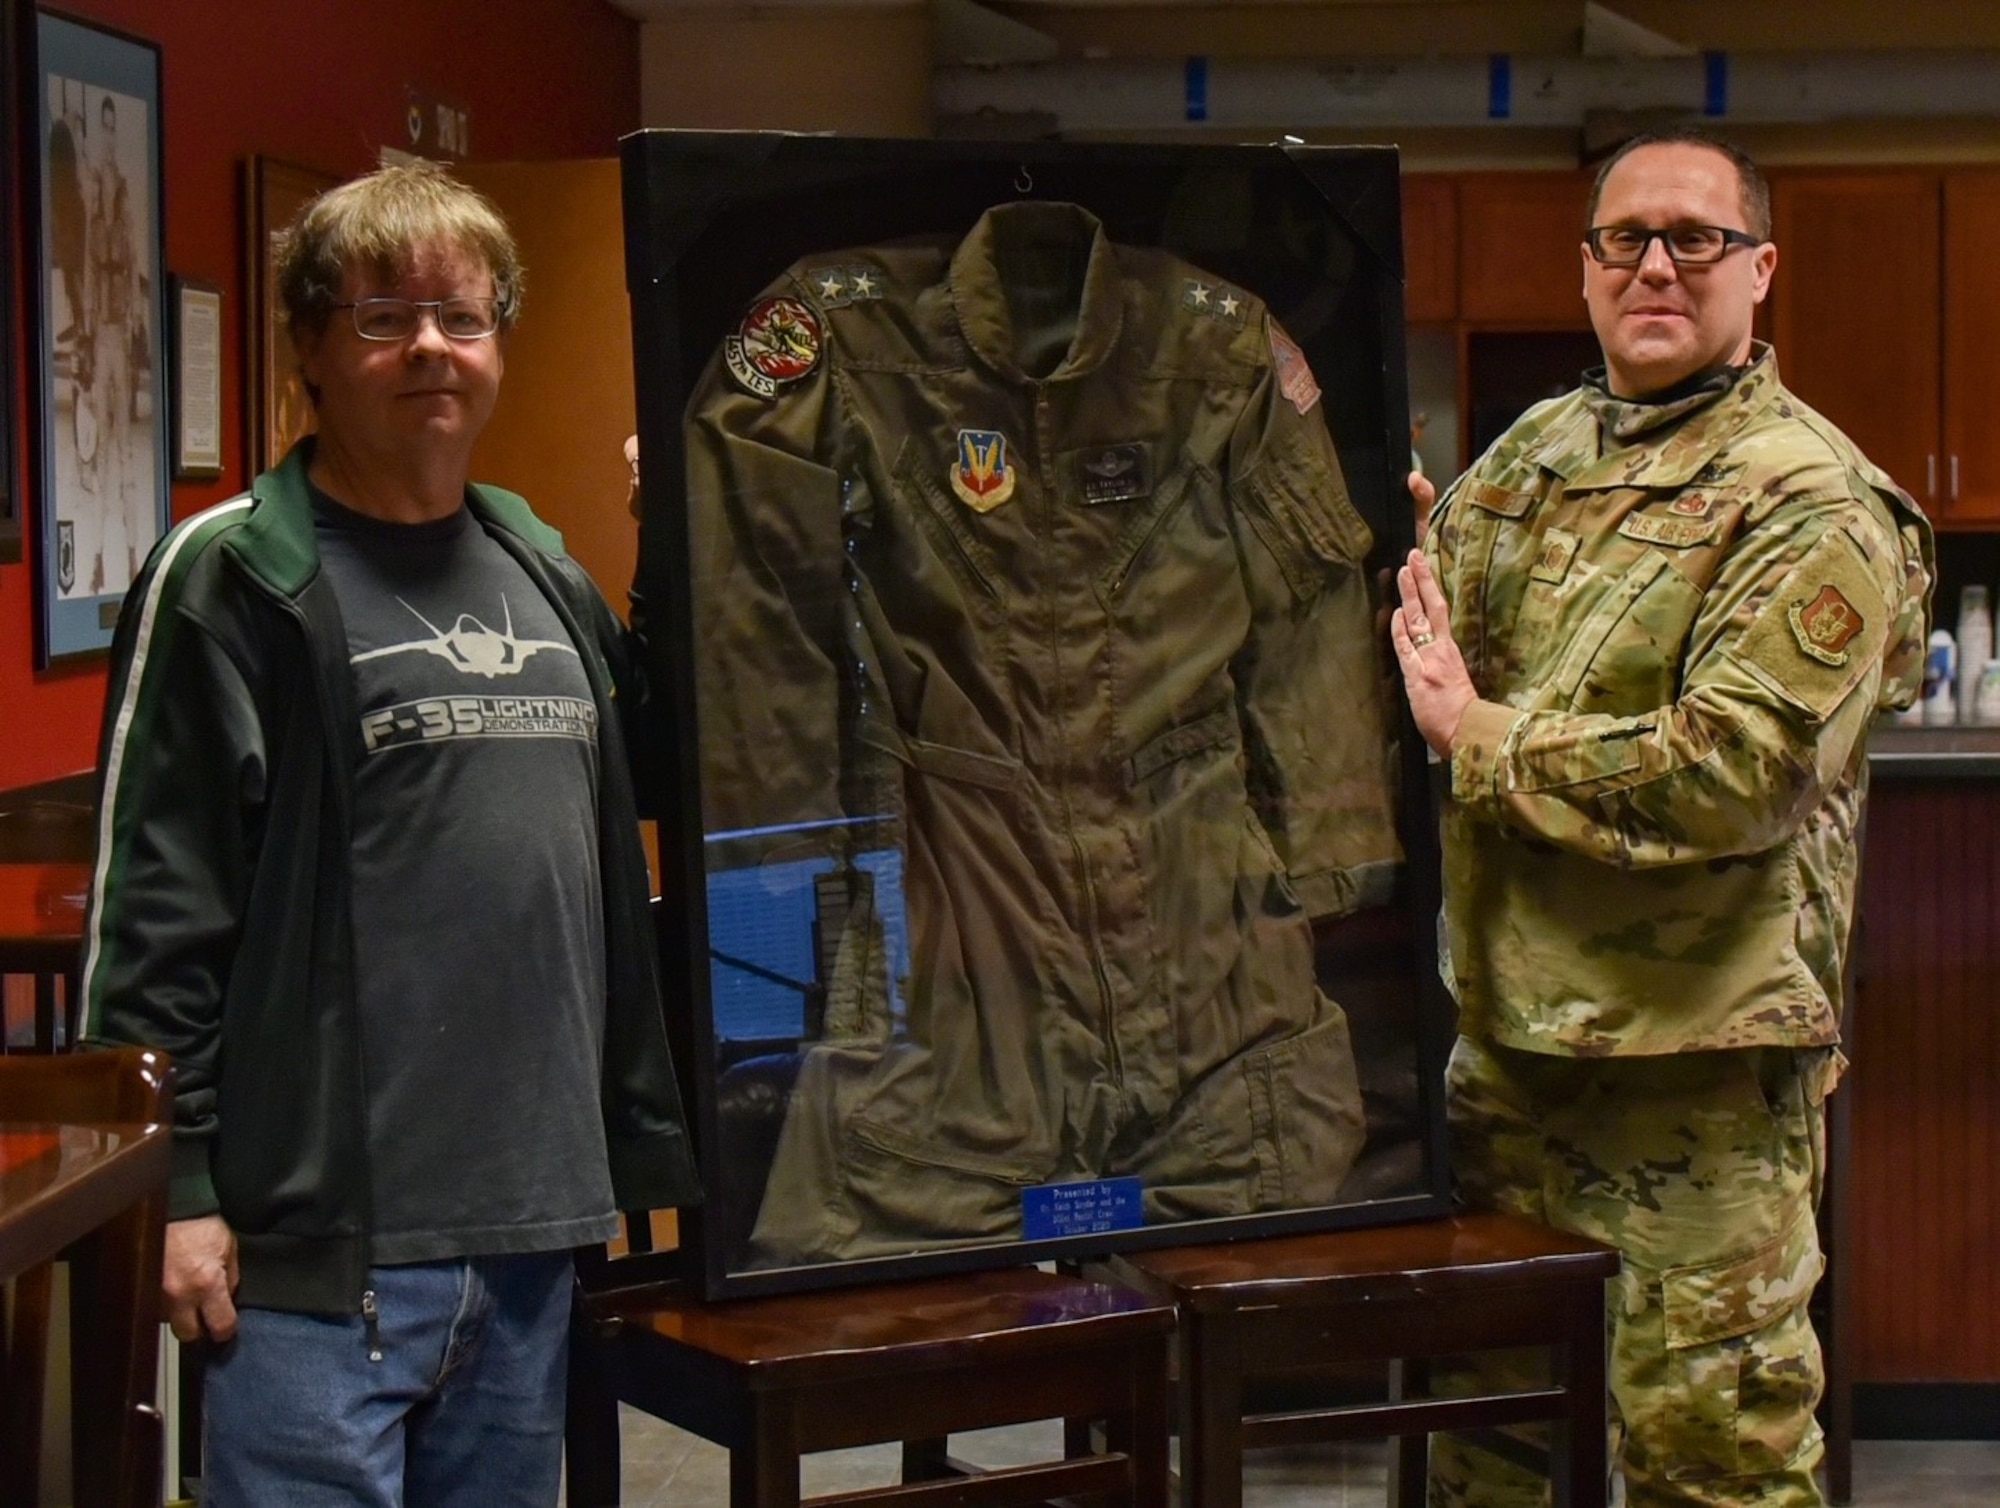 (left) Mr. Keith Snyder, local 301st Fighter Wing supporter, and Master Sgt. Troy Quigley, 301st Aircraft Maintenance Squadron weapons load team chief, display the uniform of retired Maj. Gen. John E. Taylor Jr., a former 301st Tactical Fighter Wing commander, on March 7, 2021, at Naval Air Station Joint Reserve Base Fort Worth, Texas.